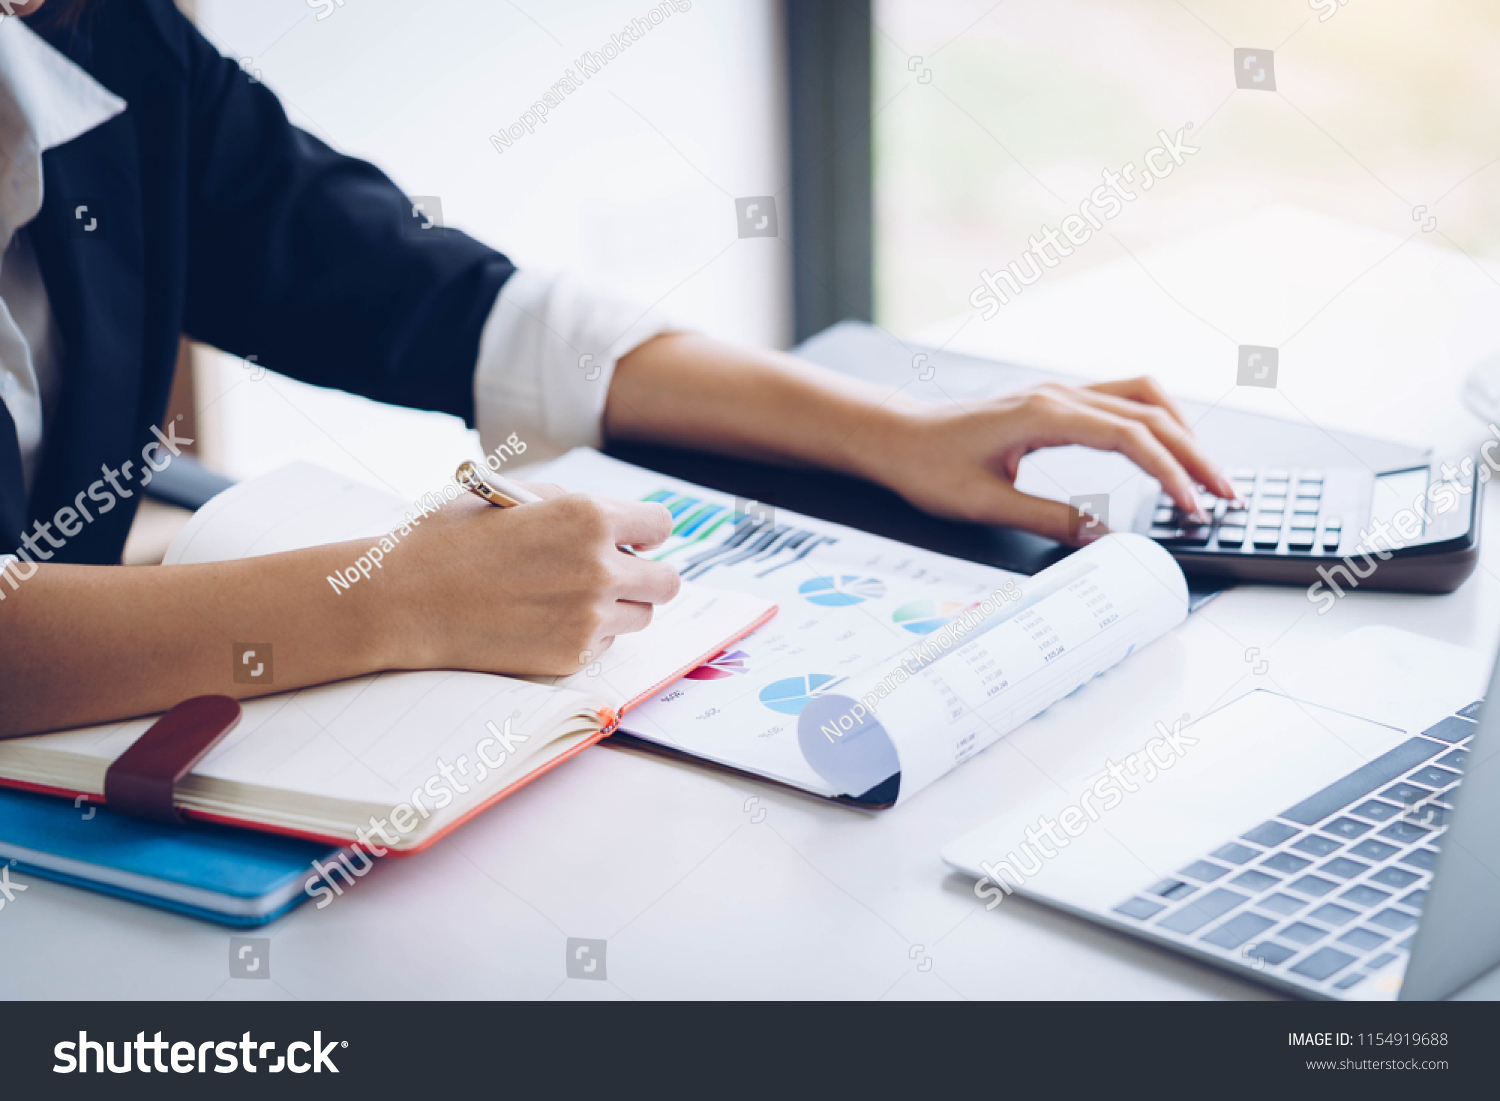 Business woman working with financial data hand using calculator and writing make note with calculate. Business financial and accounting concept. #1154919688